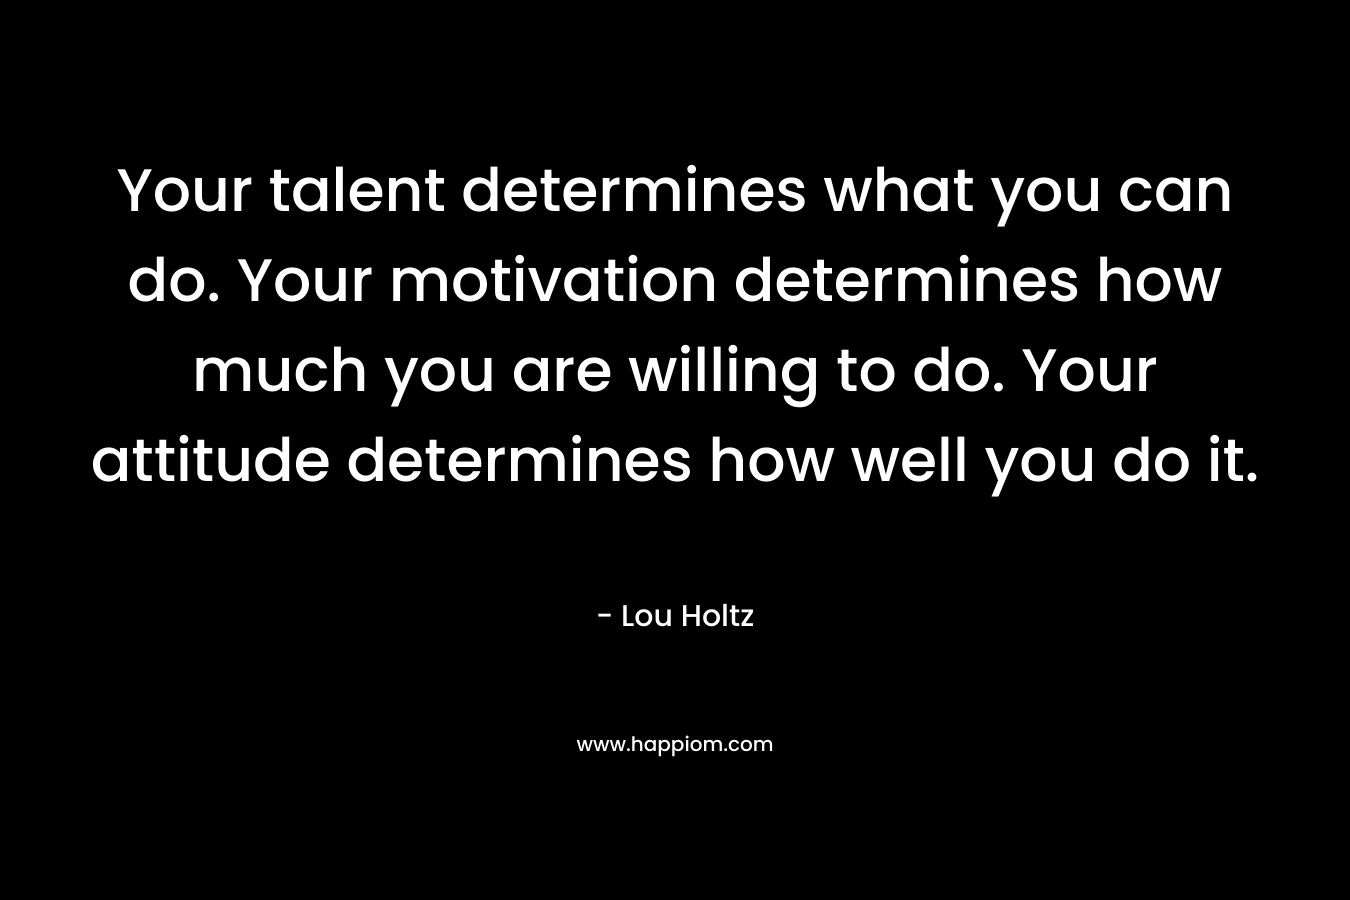 Your talent determines what you can do. Your motivation determines how much you are willing to do. Your attitude determines how well you do it.